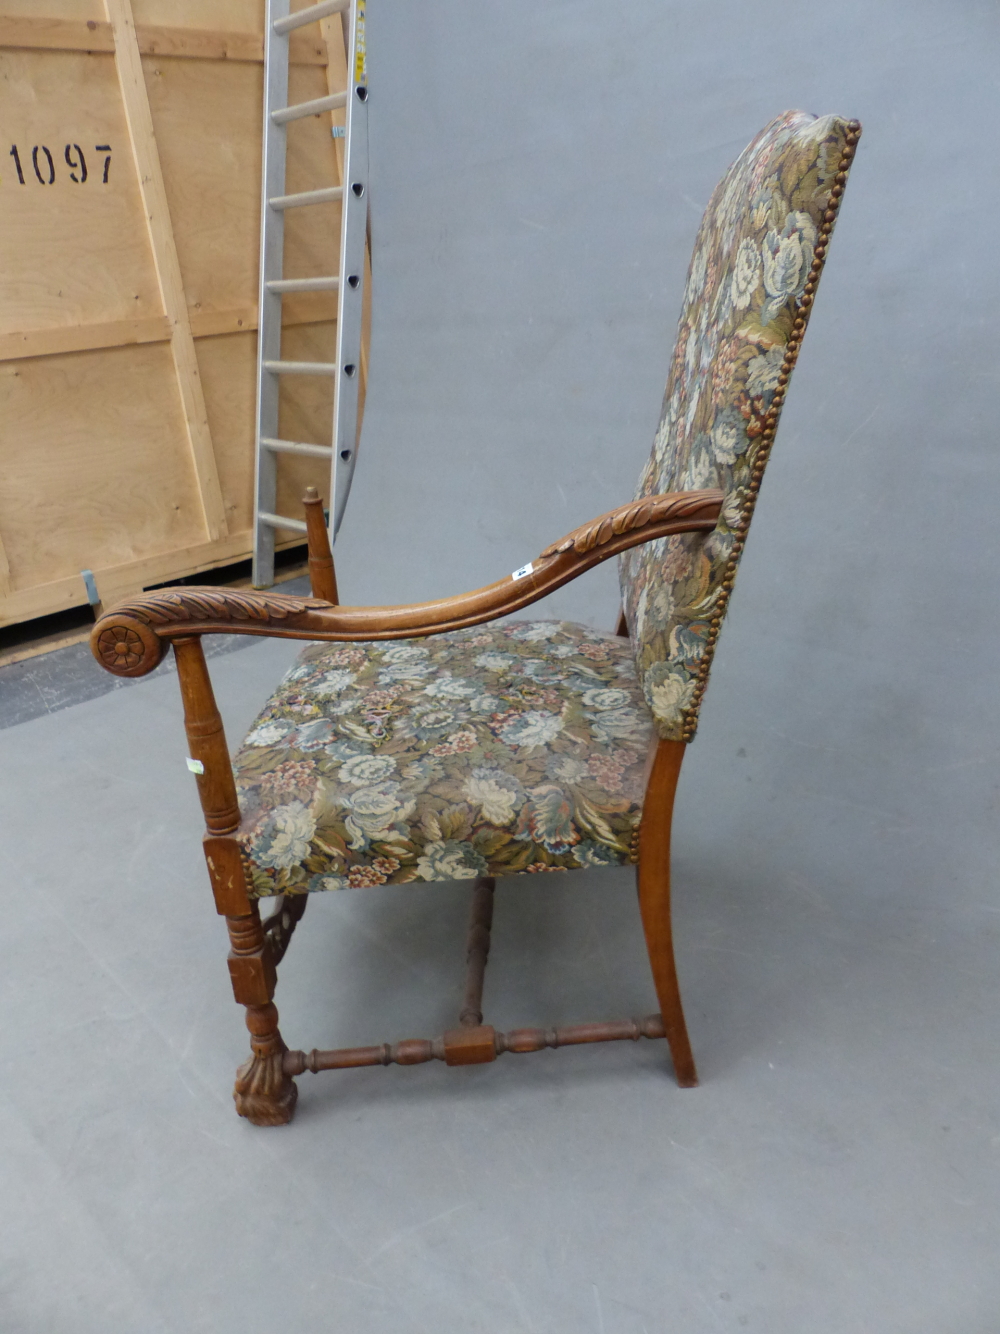 A CHARLES II STYLE BEECH WOOD ELBOW CHAIR WITH FLORAL UPHOLSTERED RECTANGULAR BACK AND SEAT - Image 8 of 9